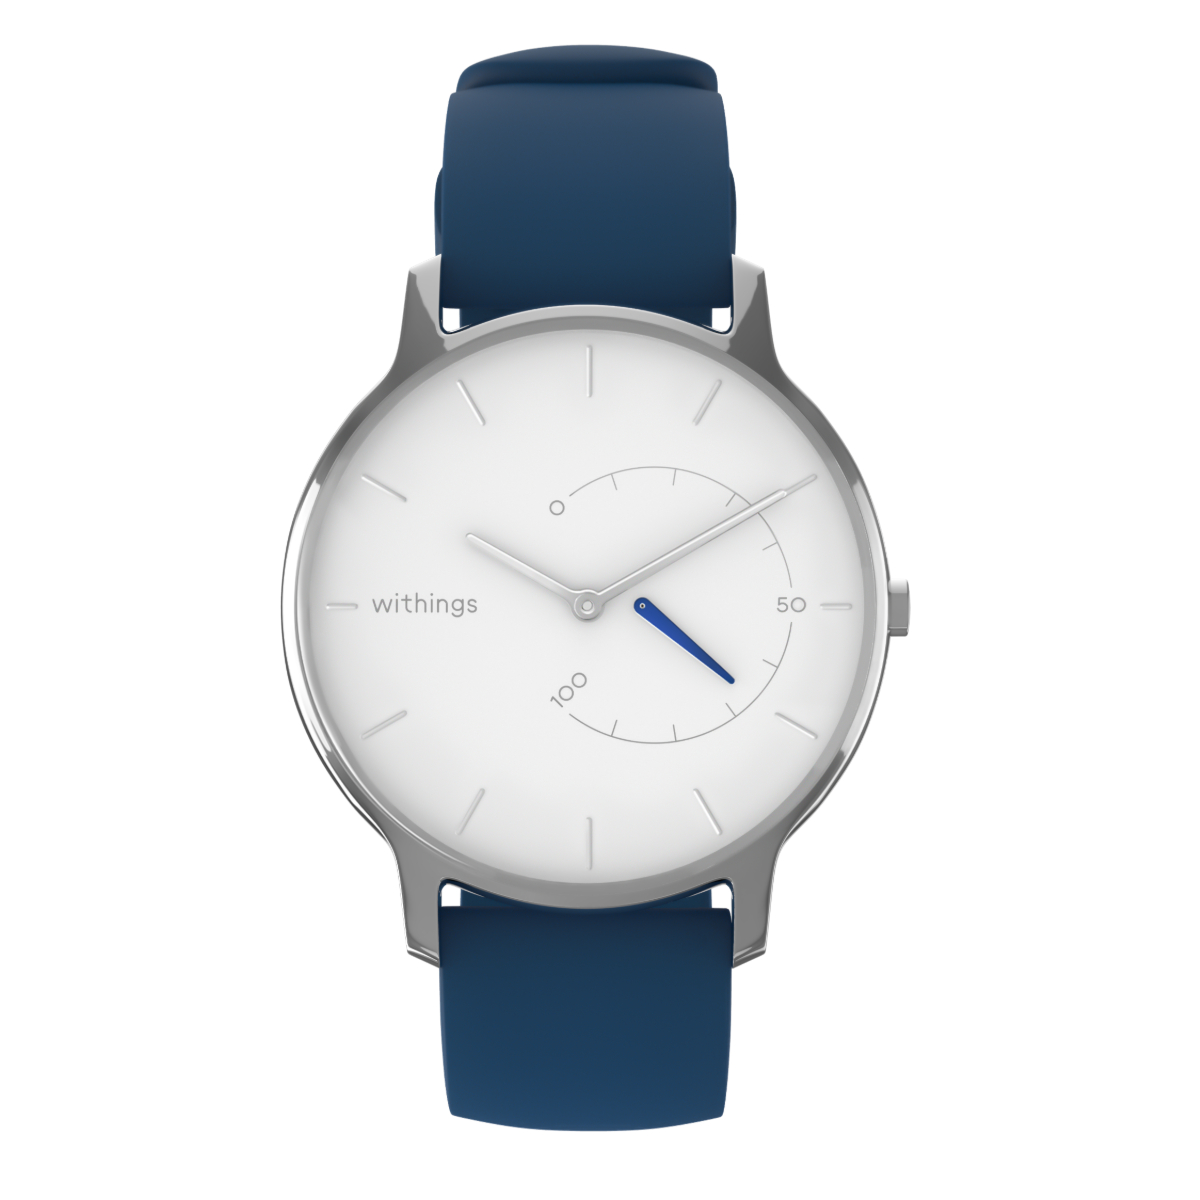 Withings Move Timeless Chic, 38mm, White & Silver - Activity tracking watch - Sleep analysis, Water resistant - Withings Official Store